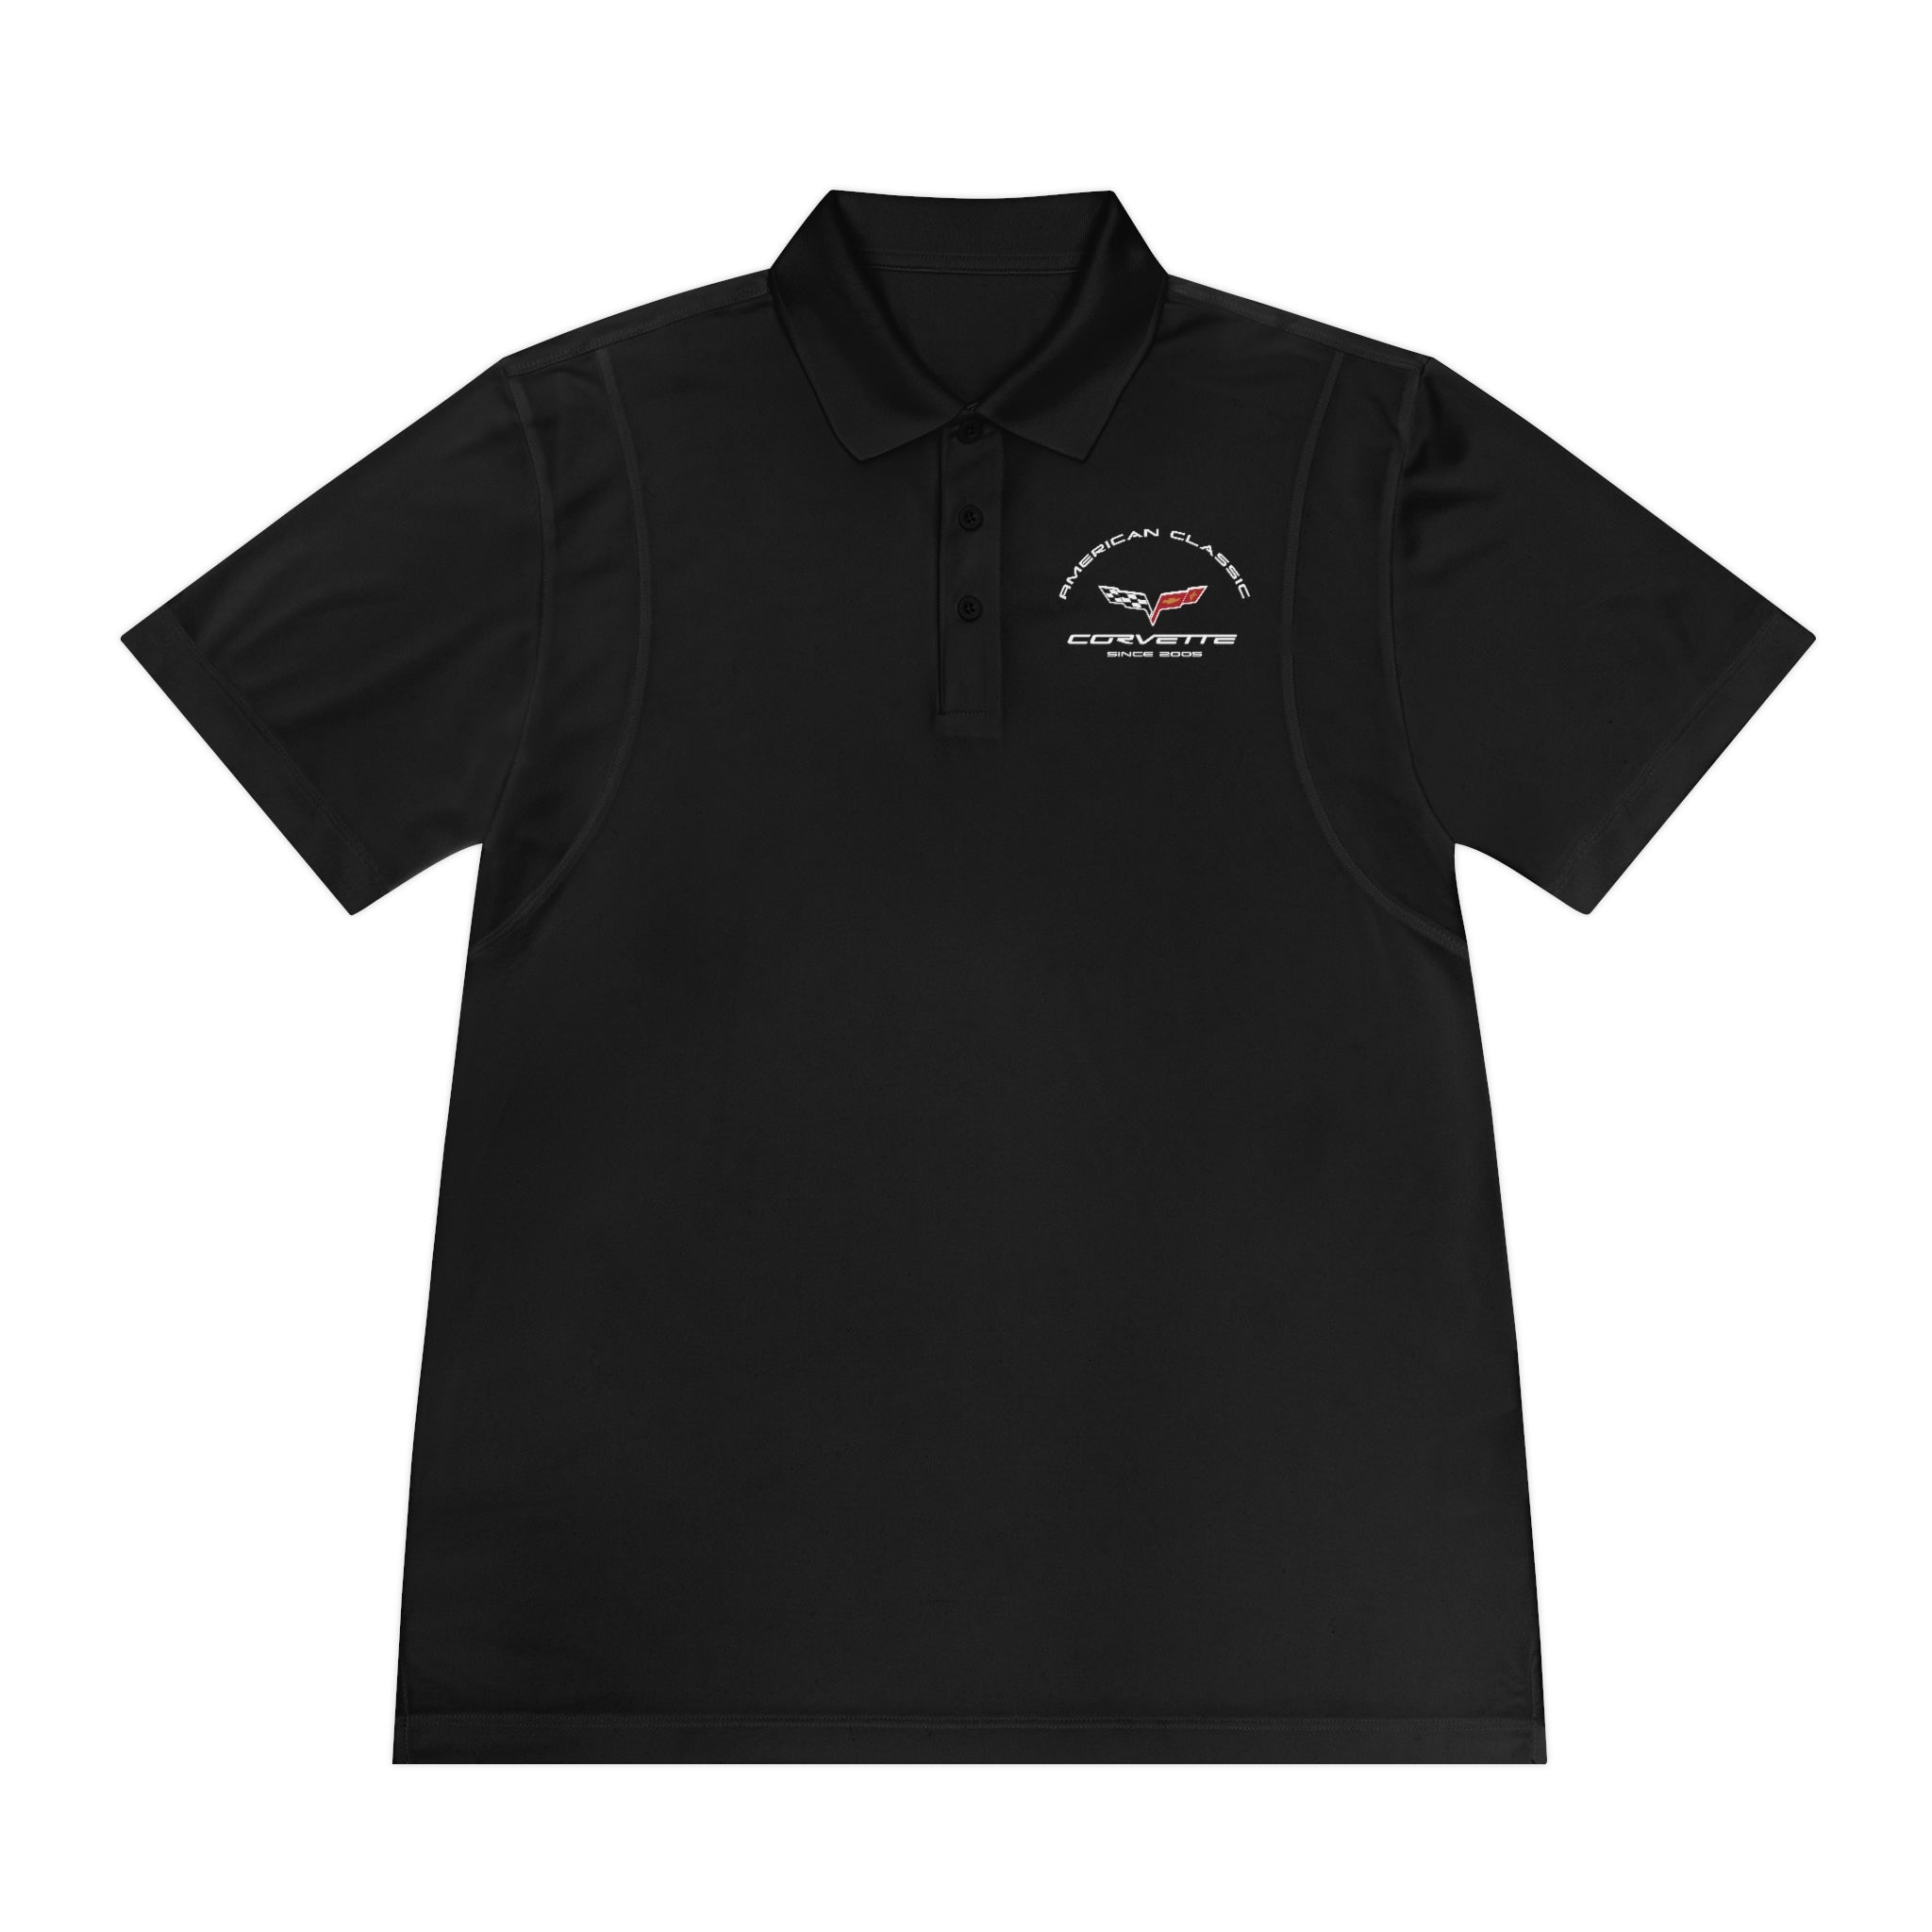 c6-corvette-mens-sport-polo-shirt-perfect-when-performance-and-style-is-part-of-the-day